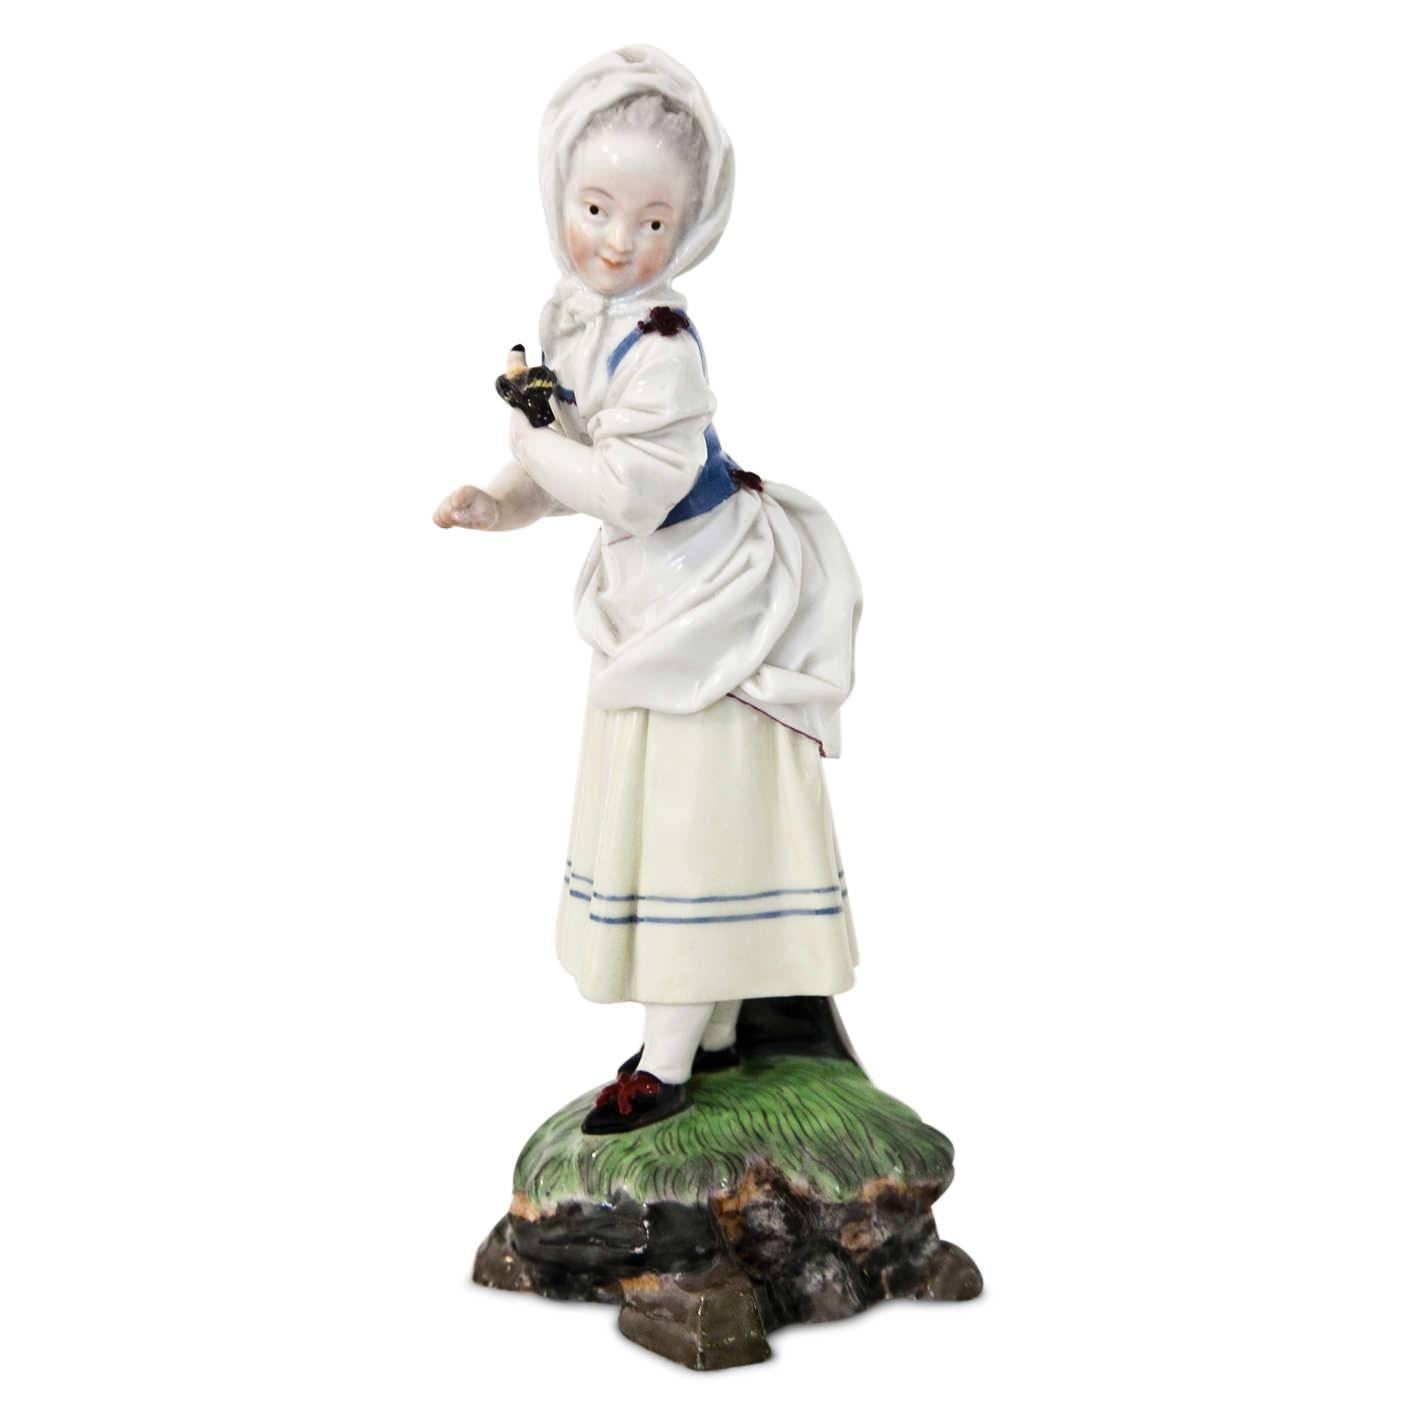 'Girl with Bonnet' Porcelain Figurine by Melchior, Höchst, 1770-1774